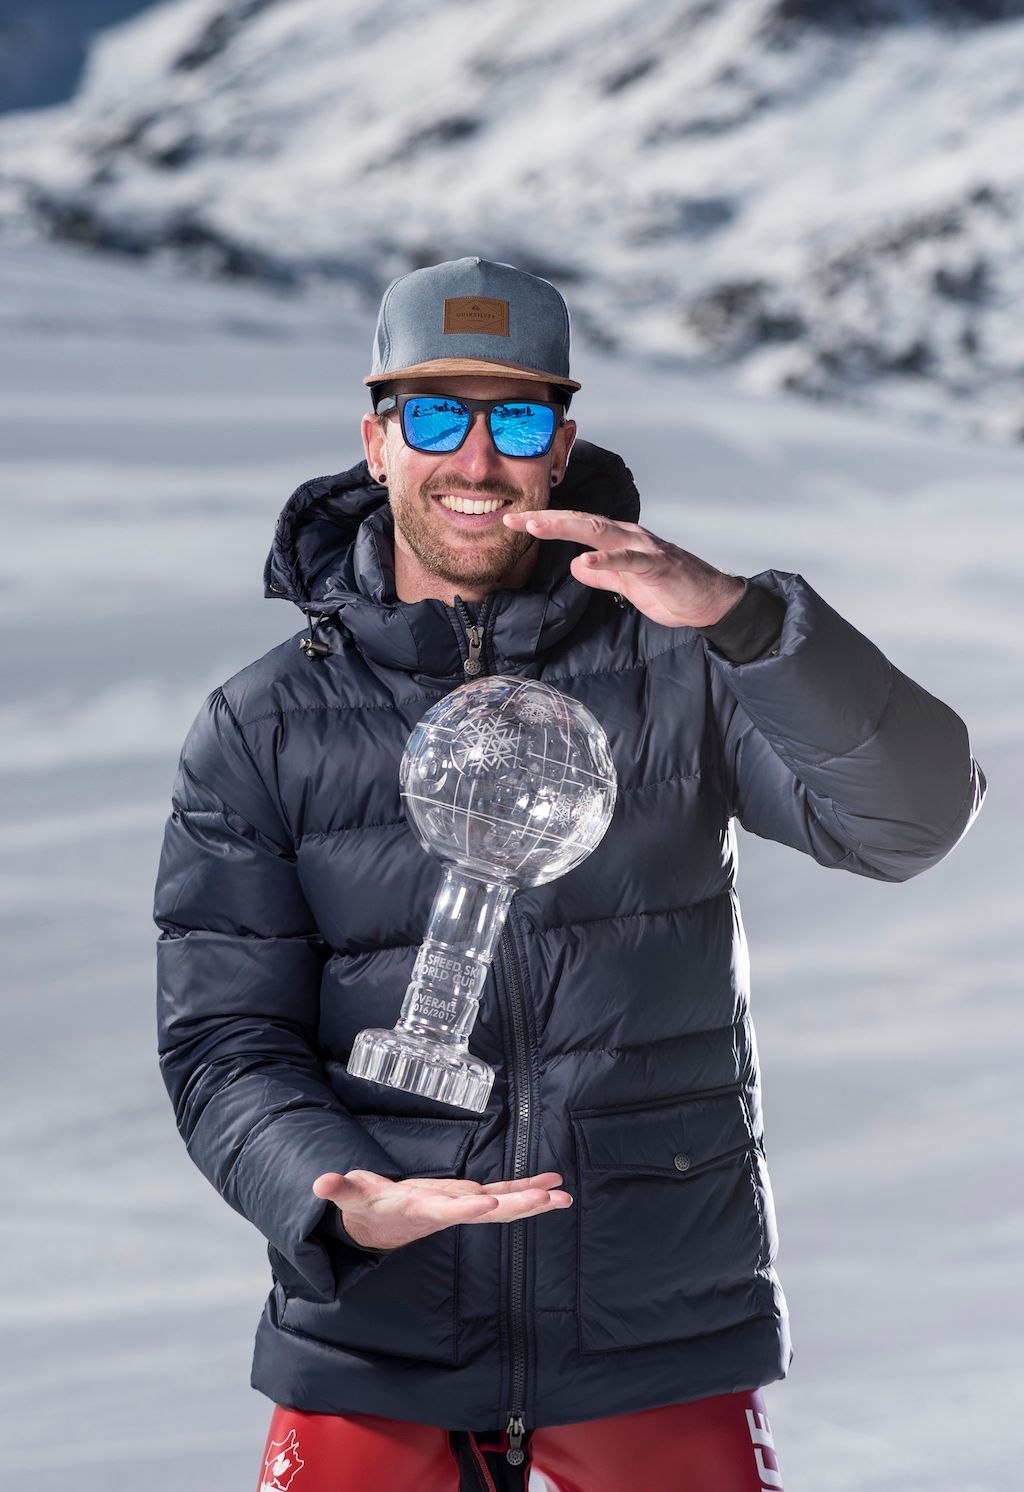 Bastien Montes with his FIS Speed Skiing Crystal Globe